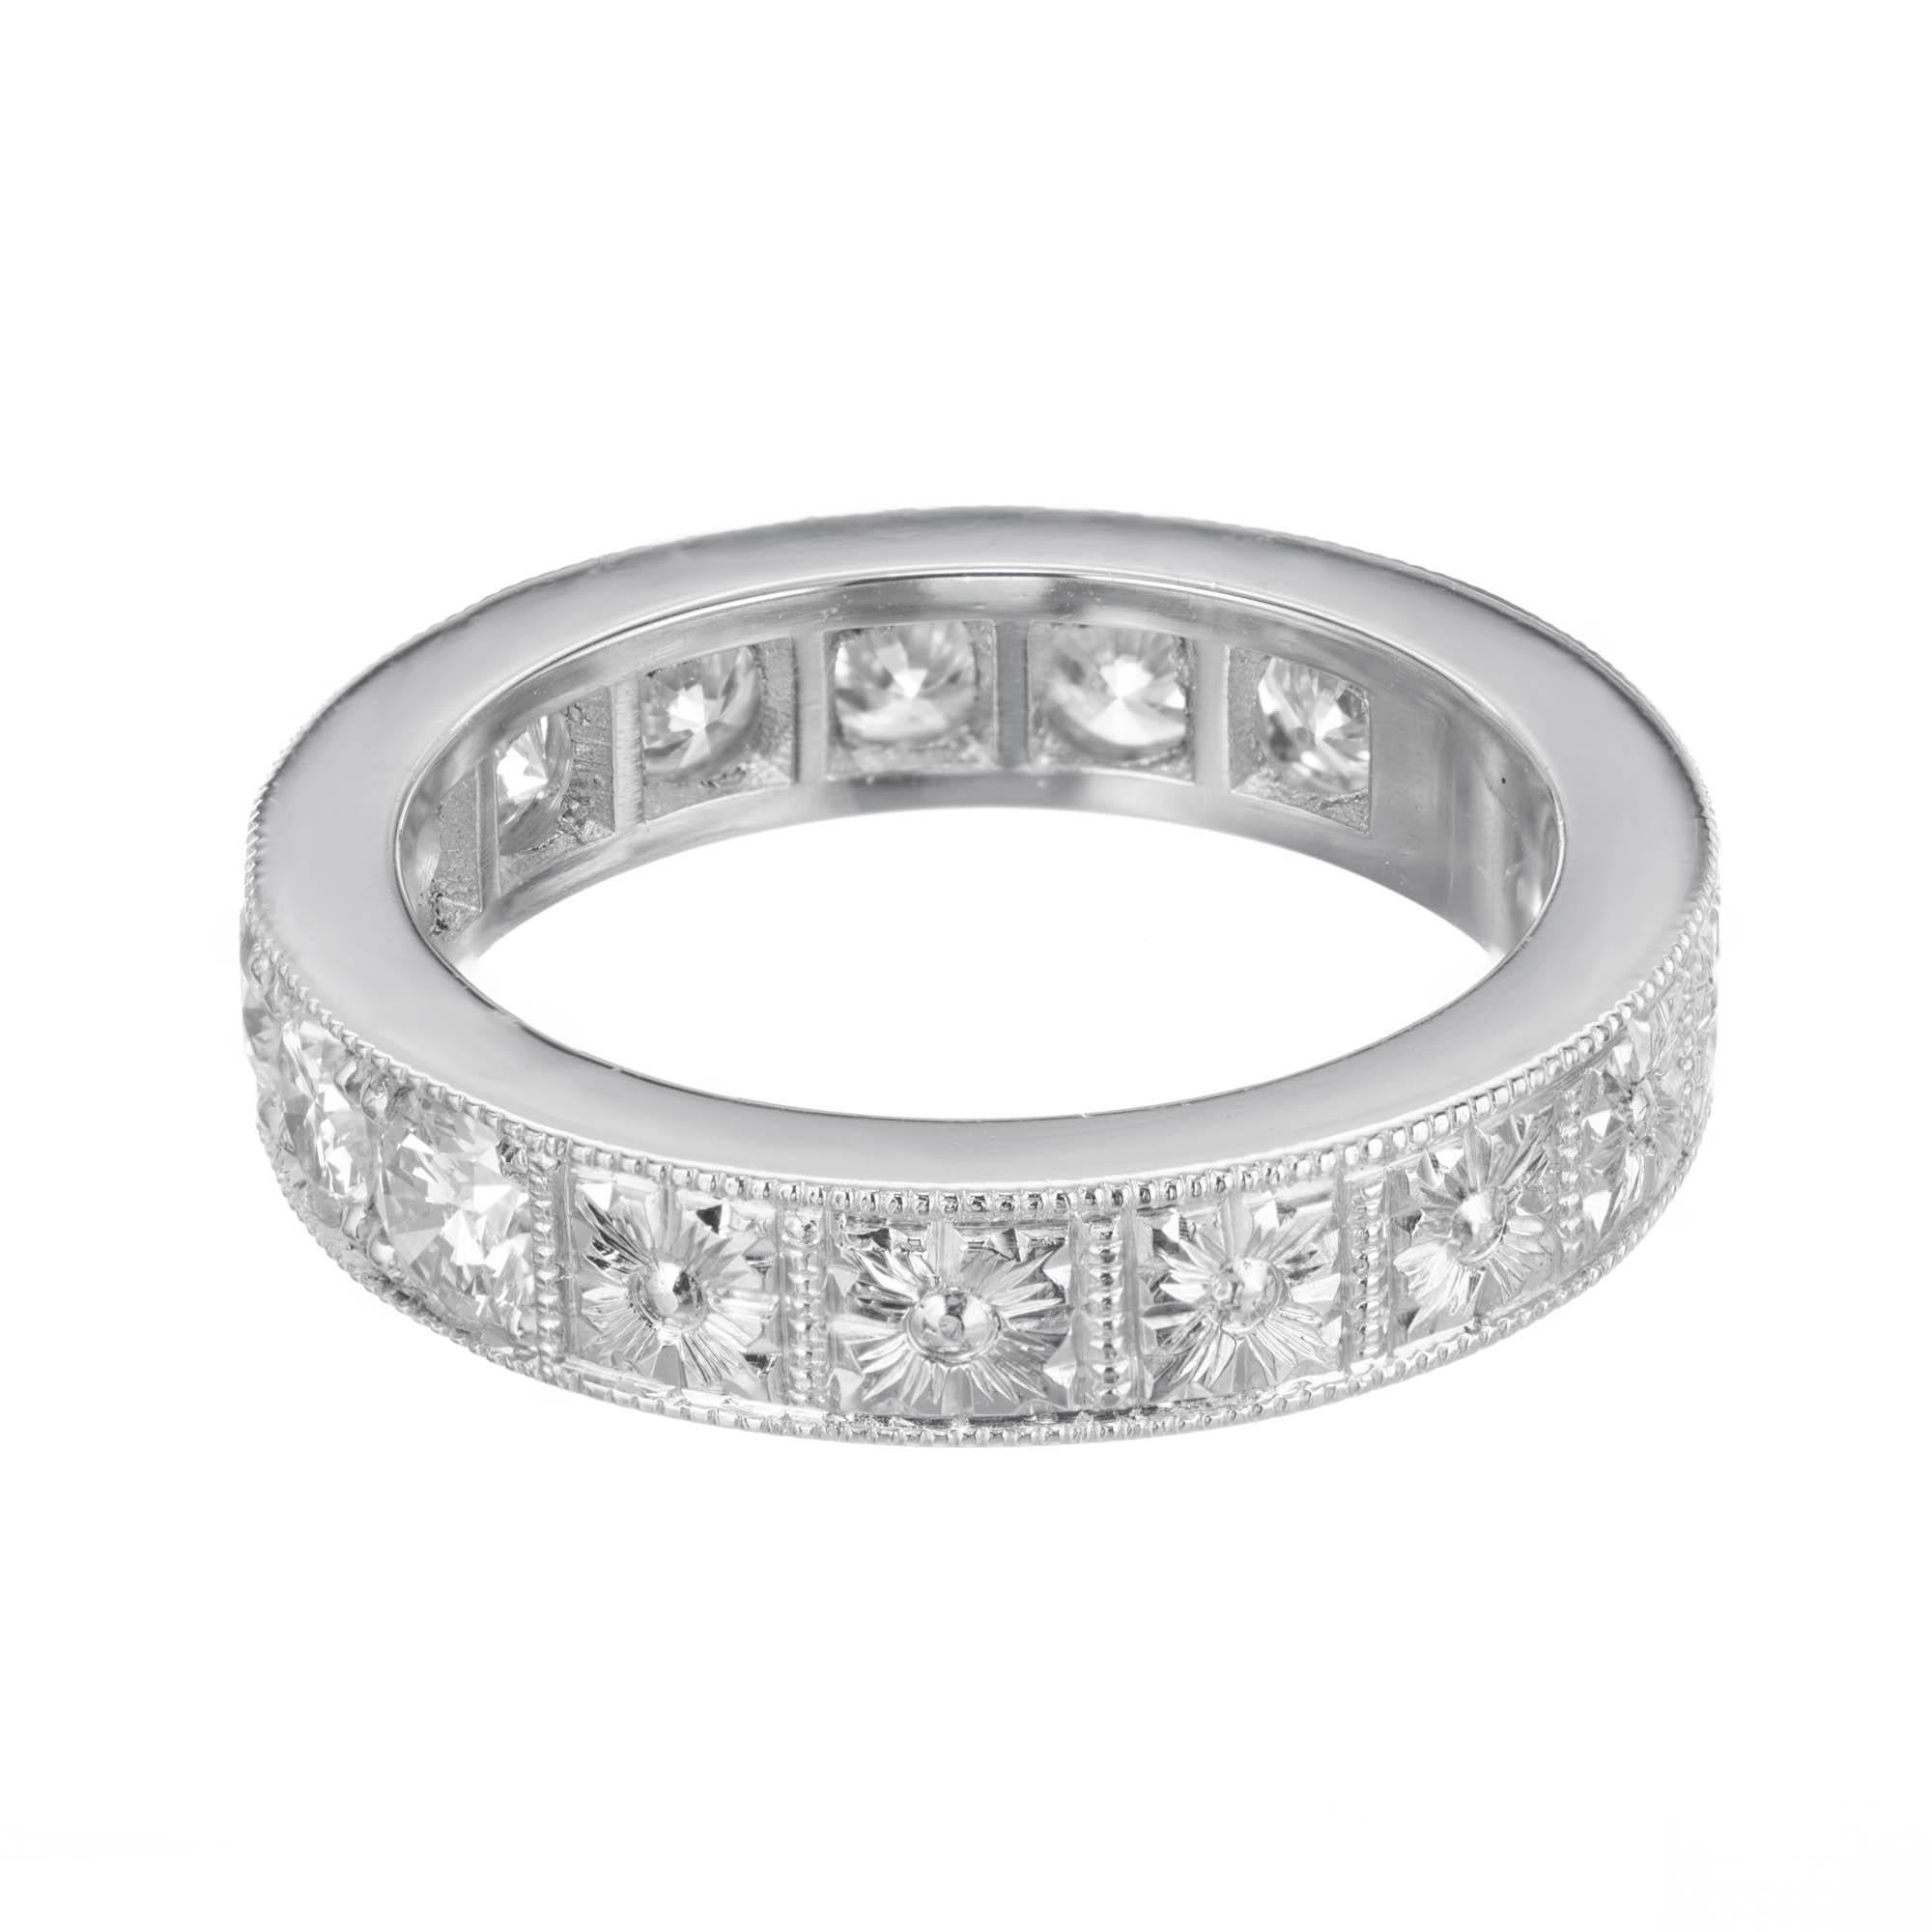  Peter Suchy Vintage Inspired custom made wedding ring with 2.20ct of bead set Diamonds, F color, VS to SI1 clarity. The Diamonds go past half way around with engraving at the bottom. Flat 4.26mm wide ring. 
 
9 round Diamonds, approx. total weight